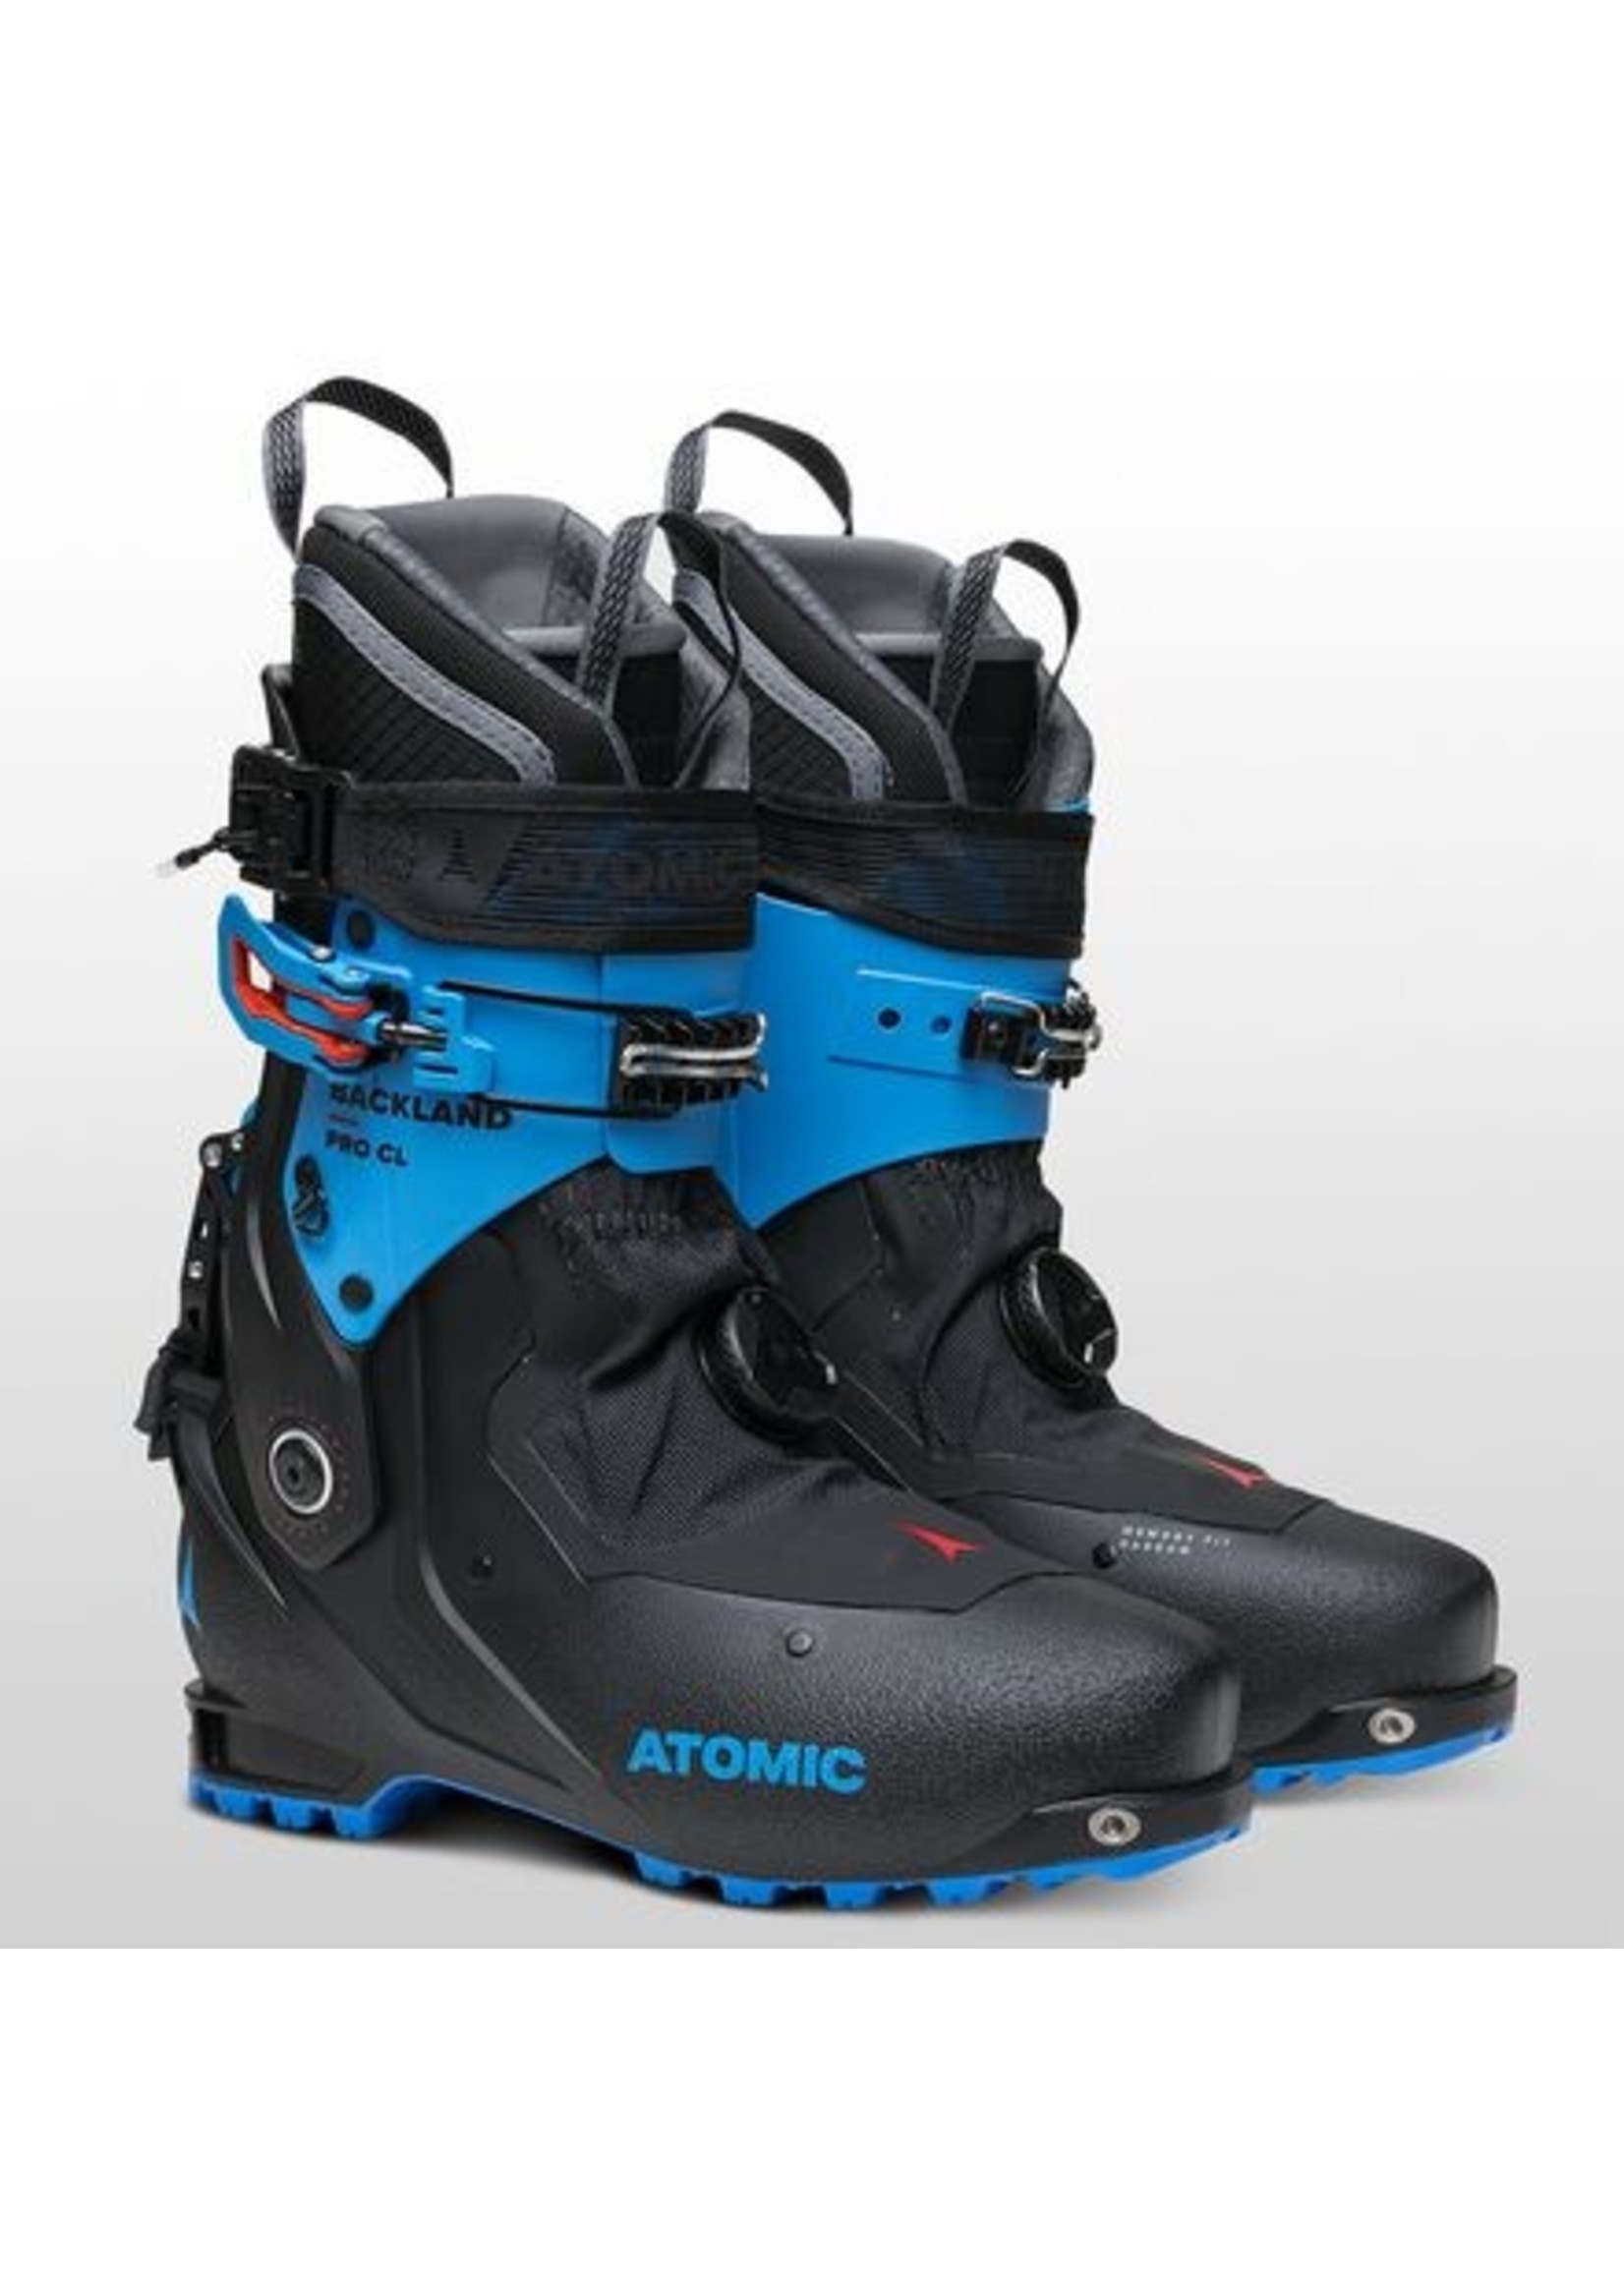 Atomic Touring Boot Backland Pro